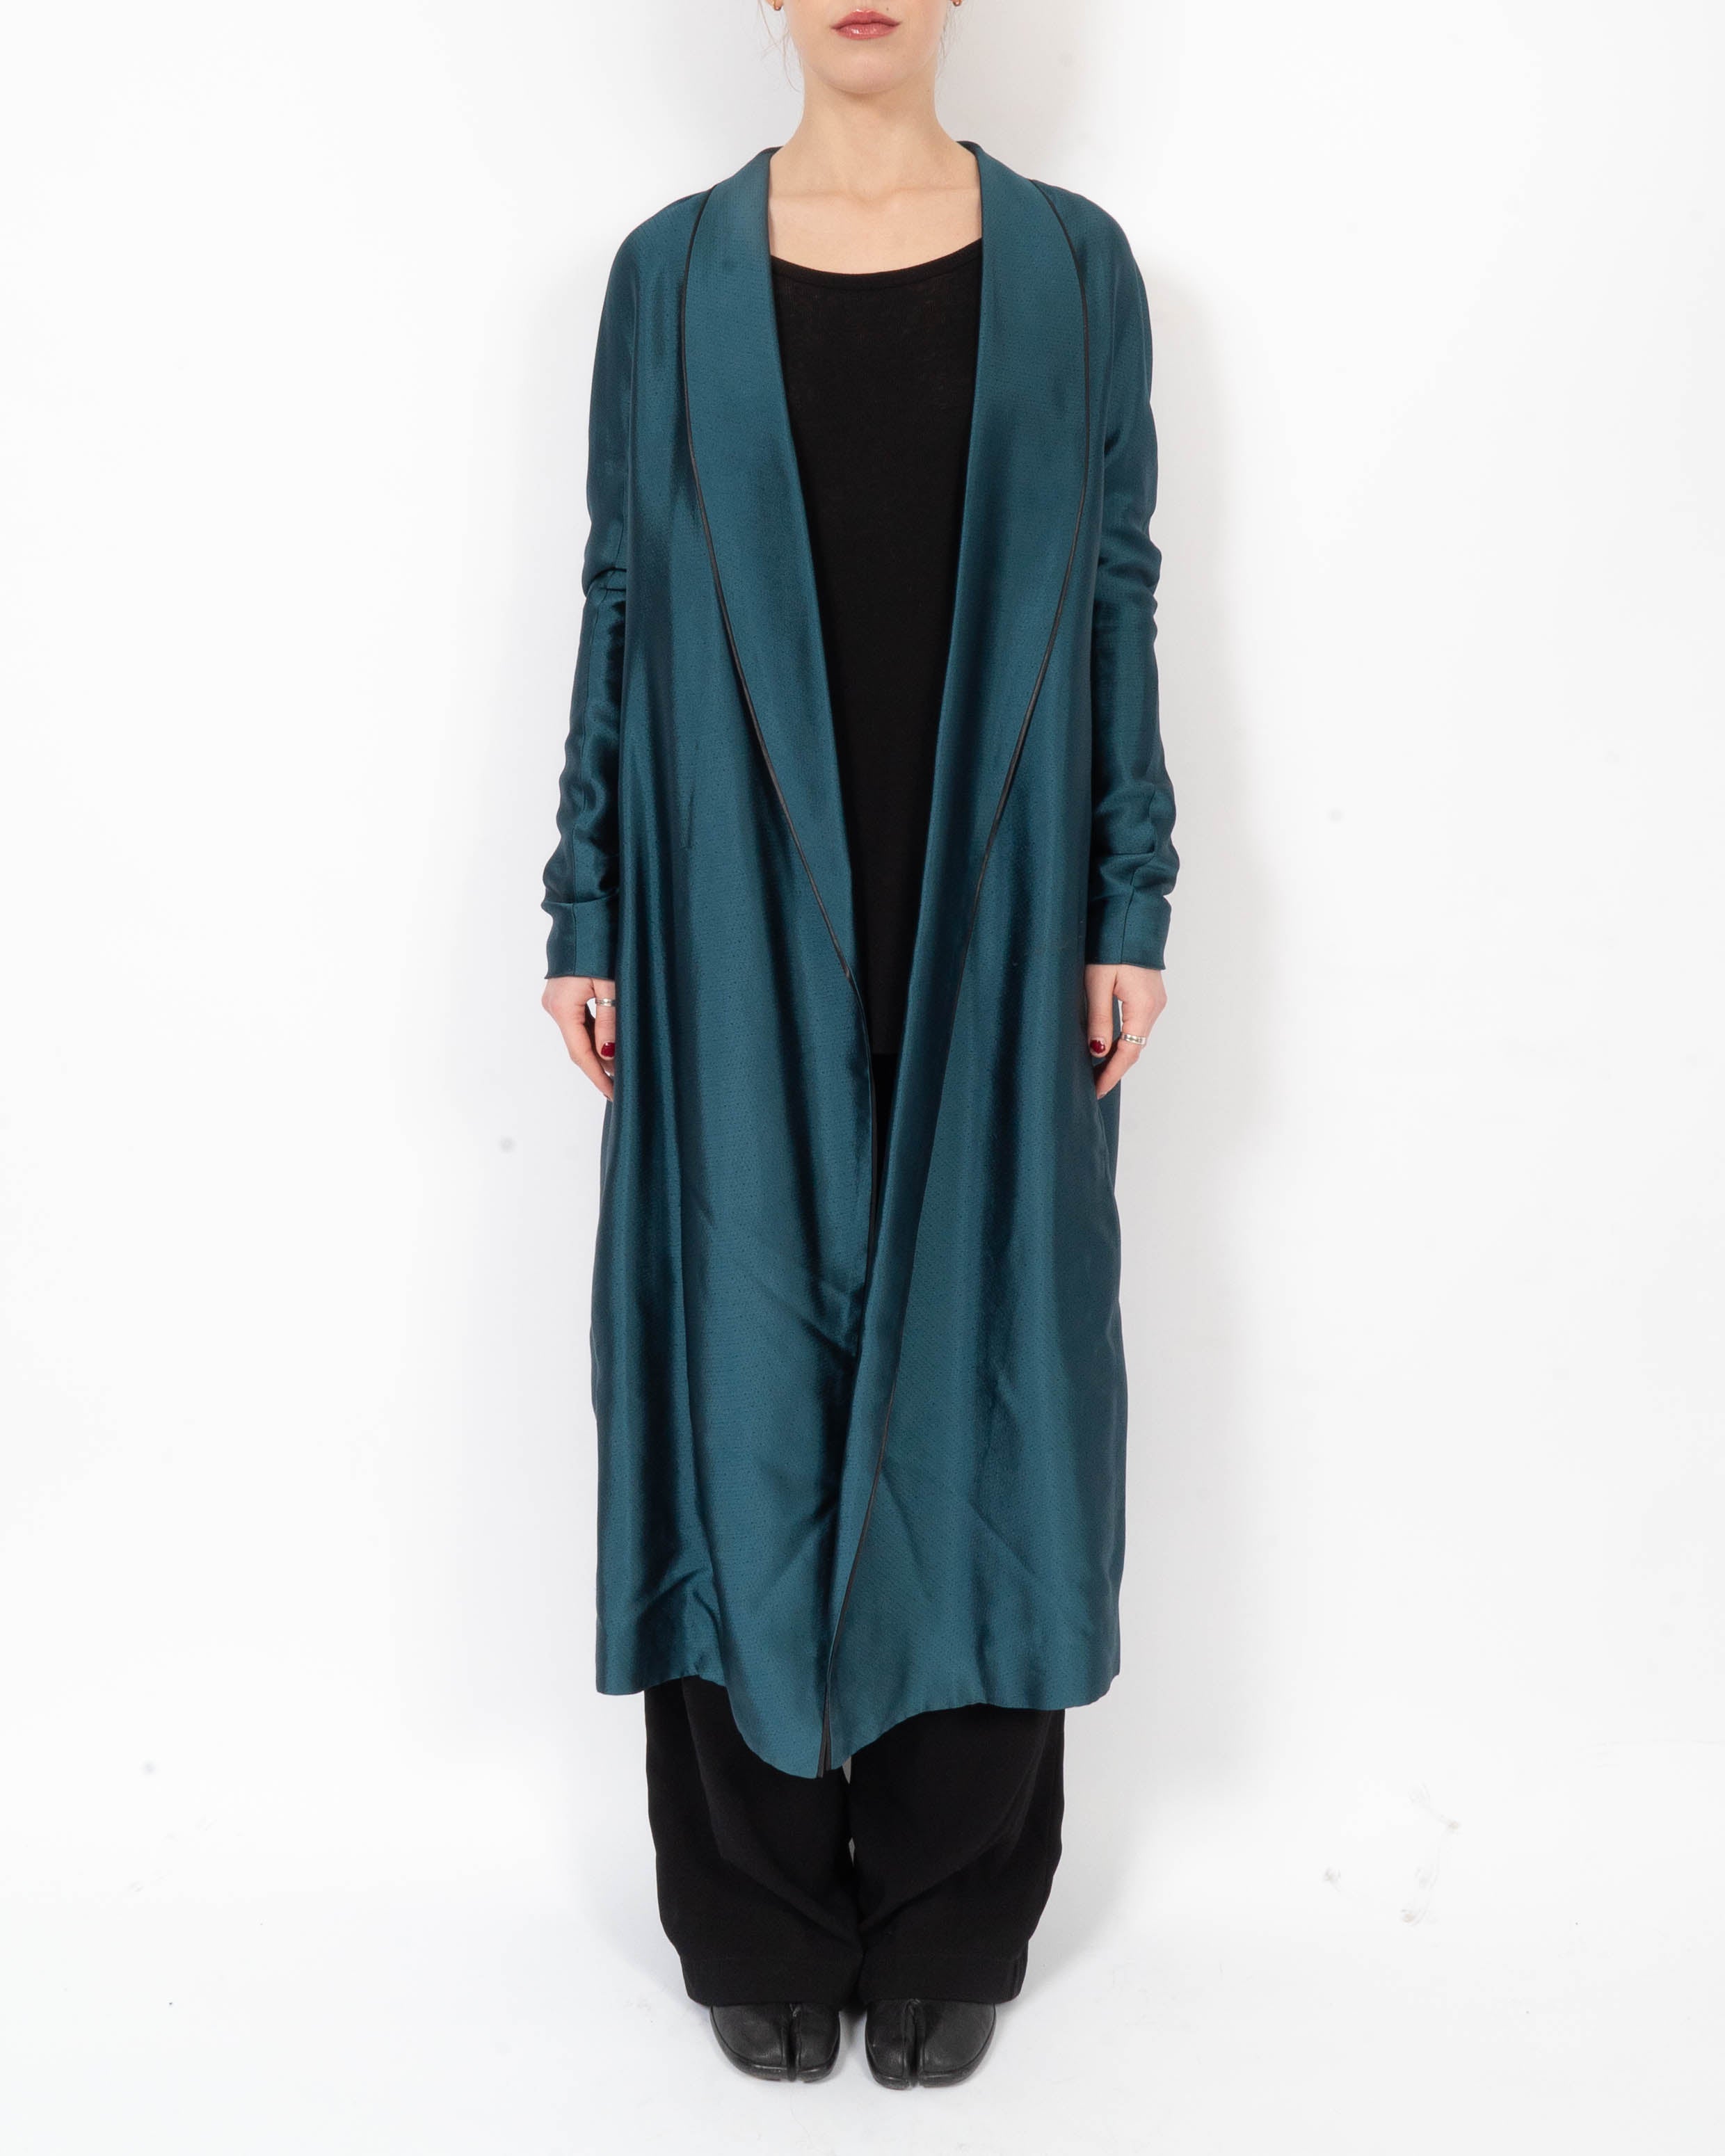 FW11 Unstructured Long-Coat in Blue Textured Viscose